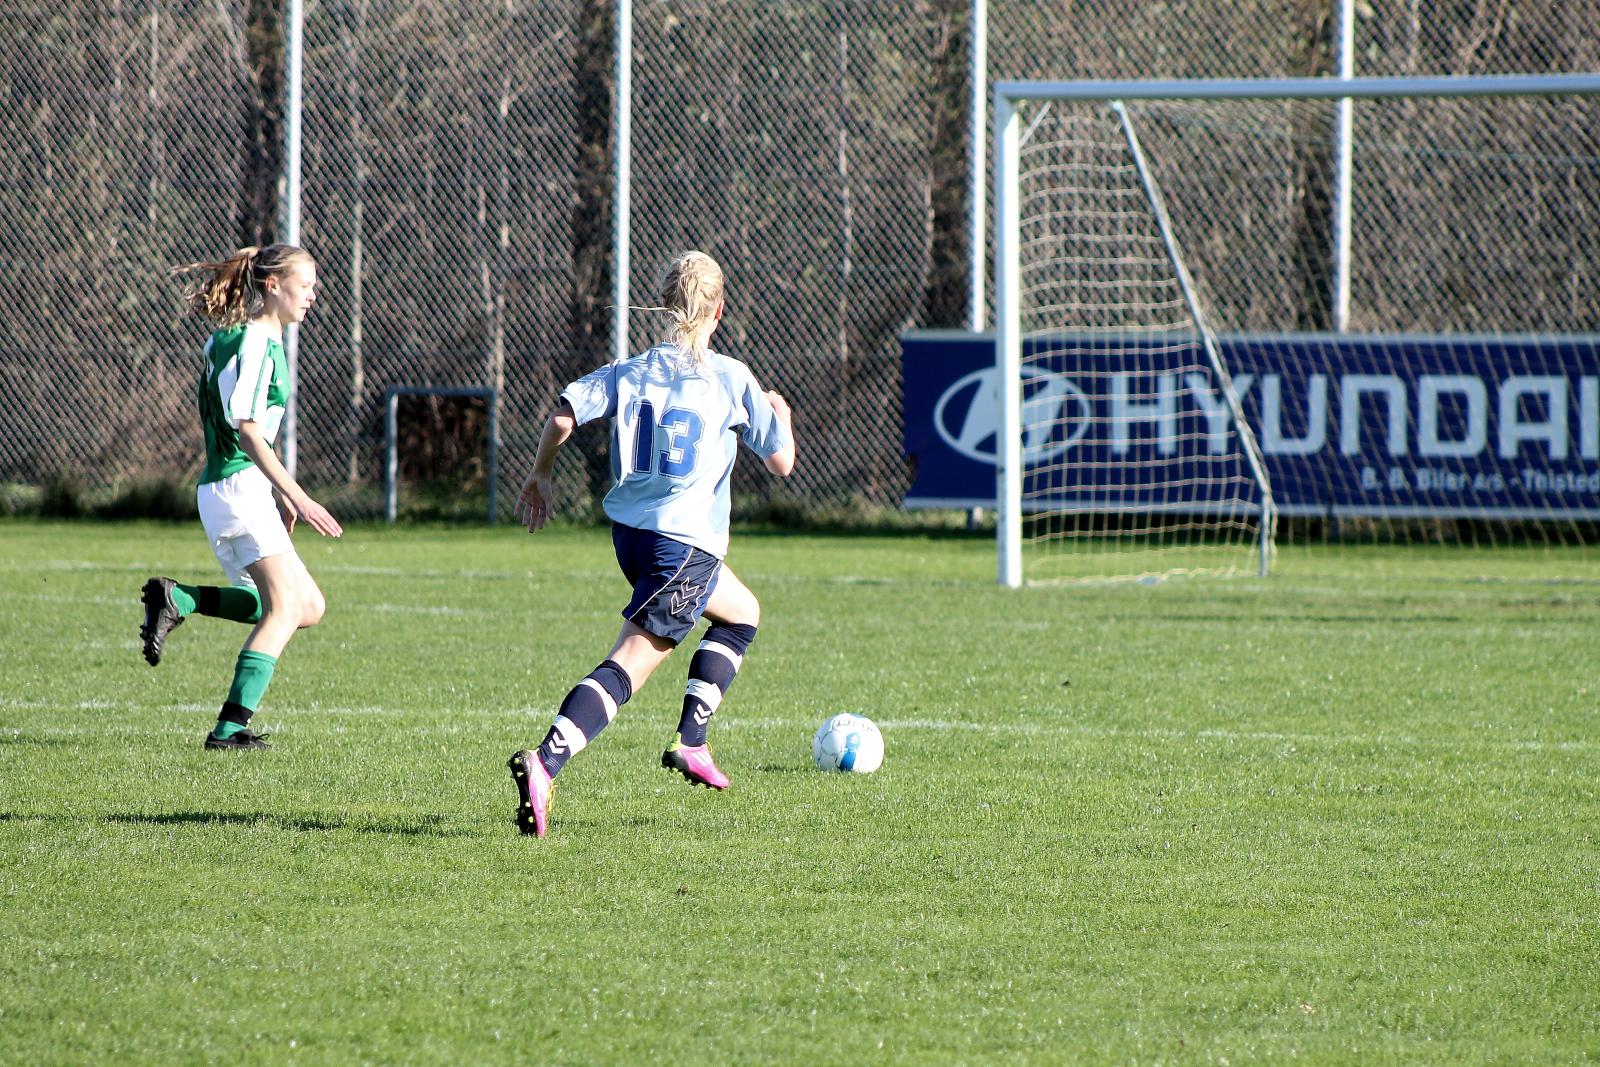 two soccer players on a grassy field are chasing the ball